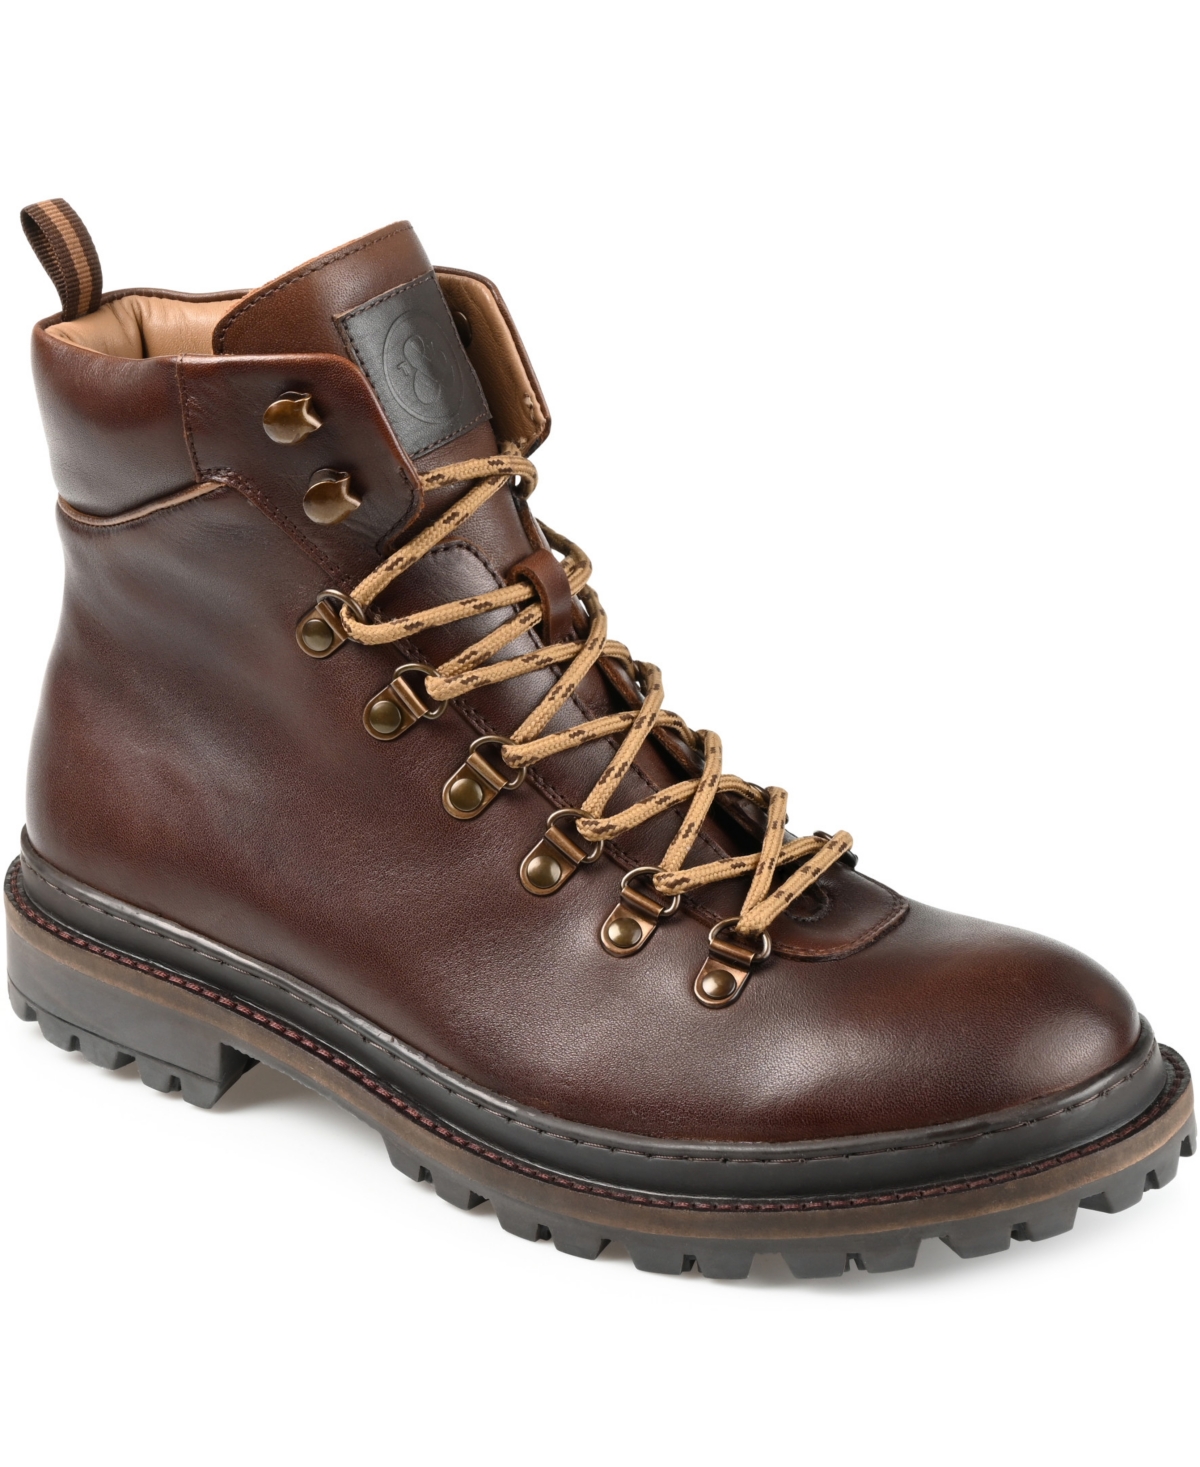 Men's Ankle Boot - Brown